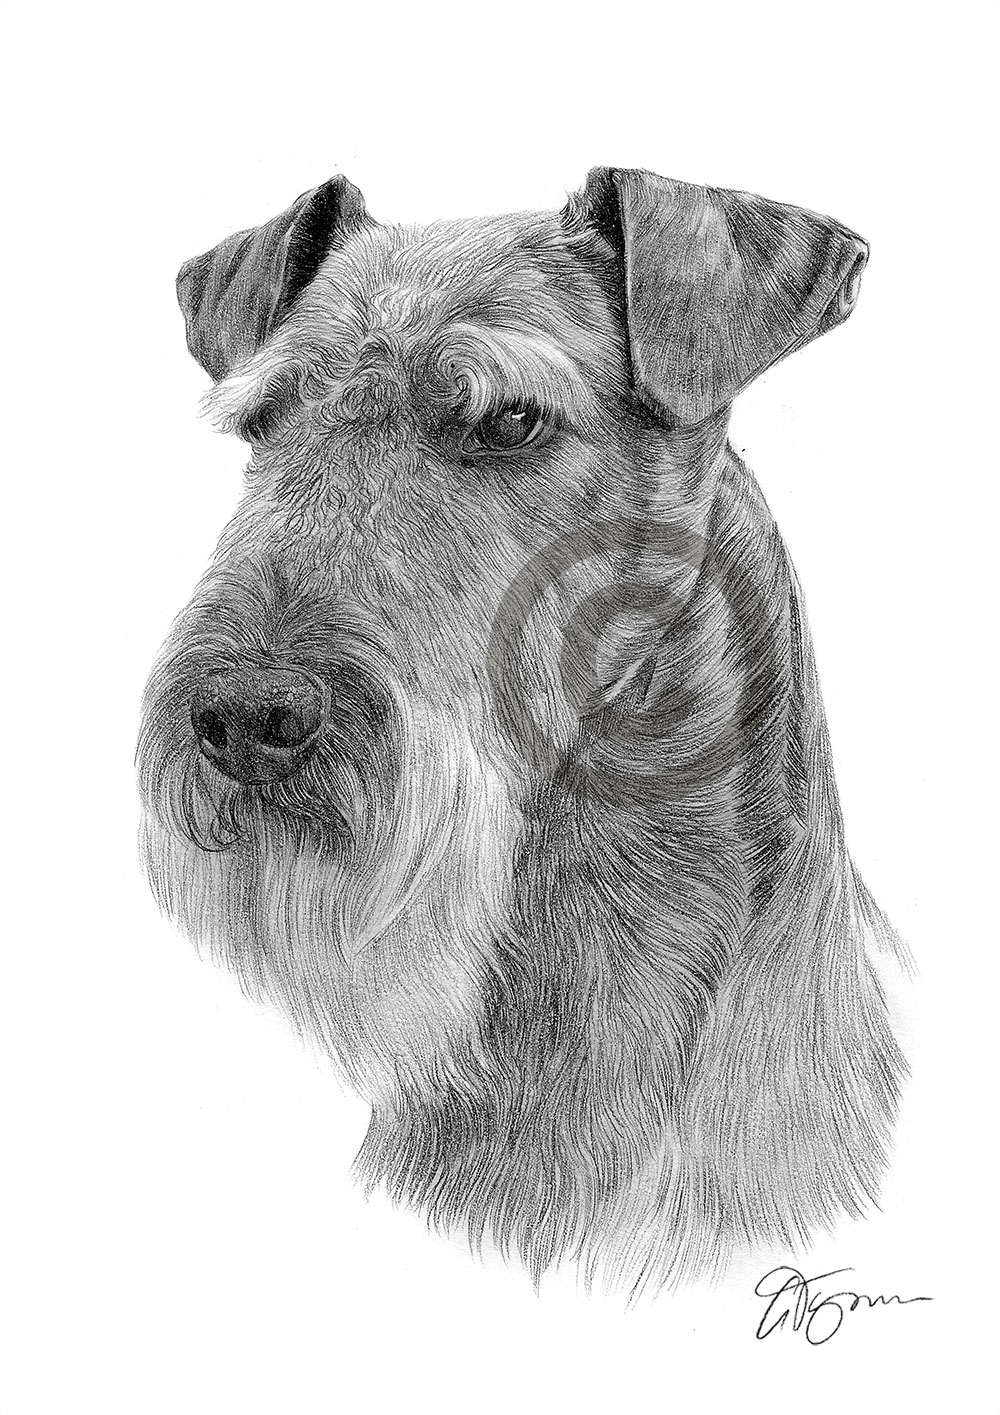 Pencil drawing of an airedale terrier by artist Gary Tymon